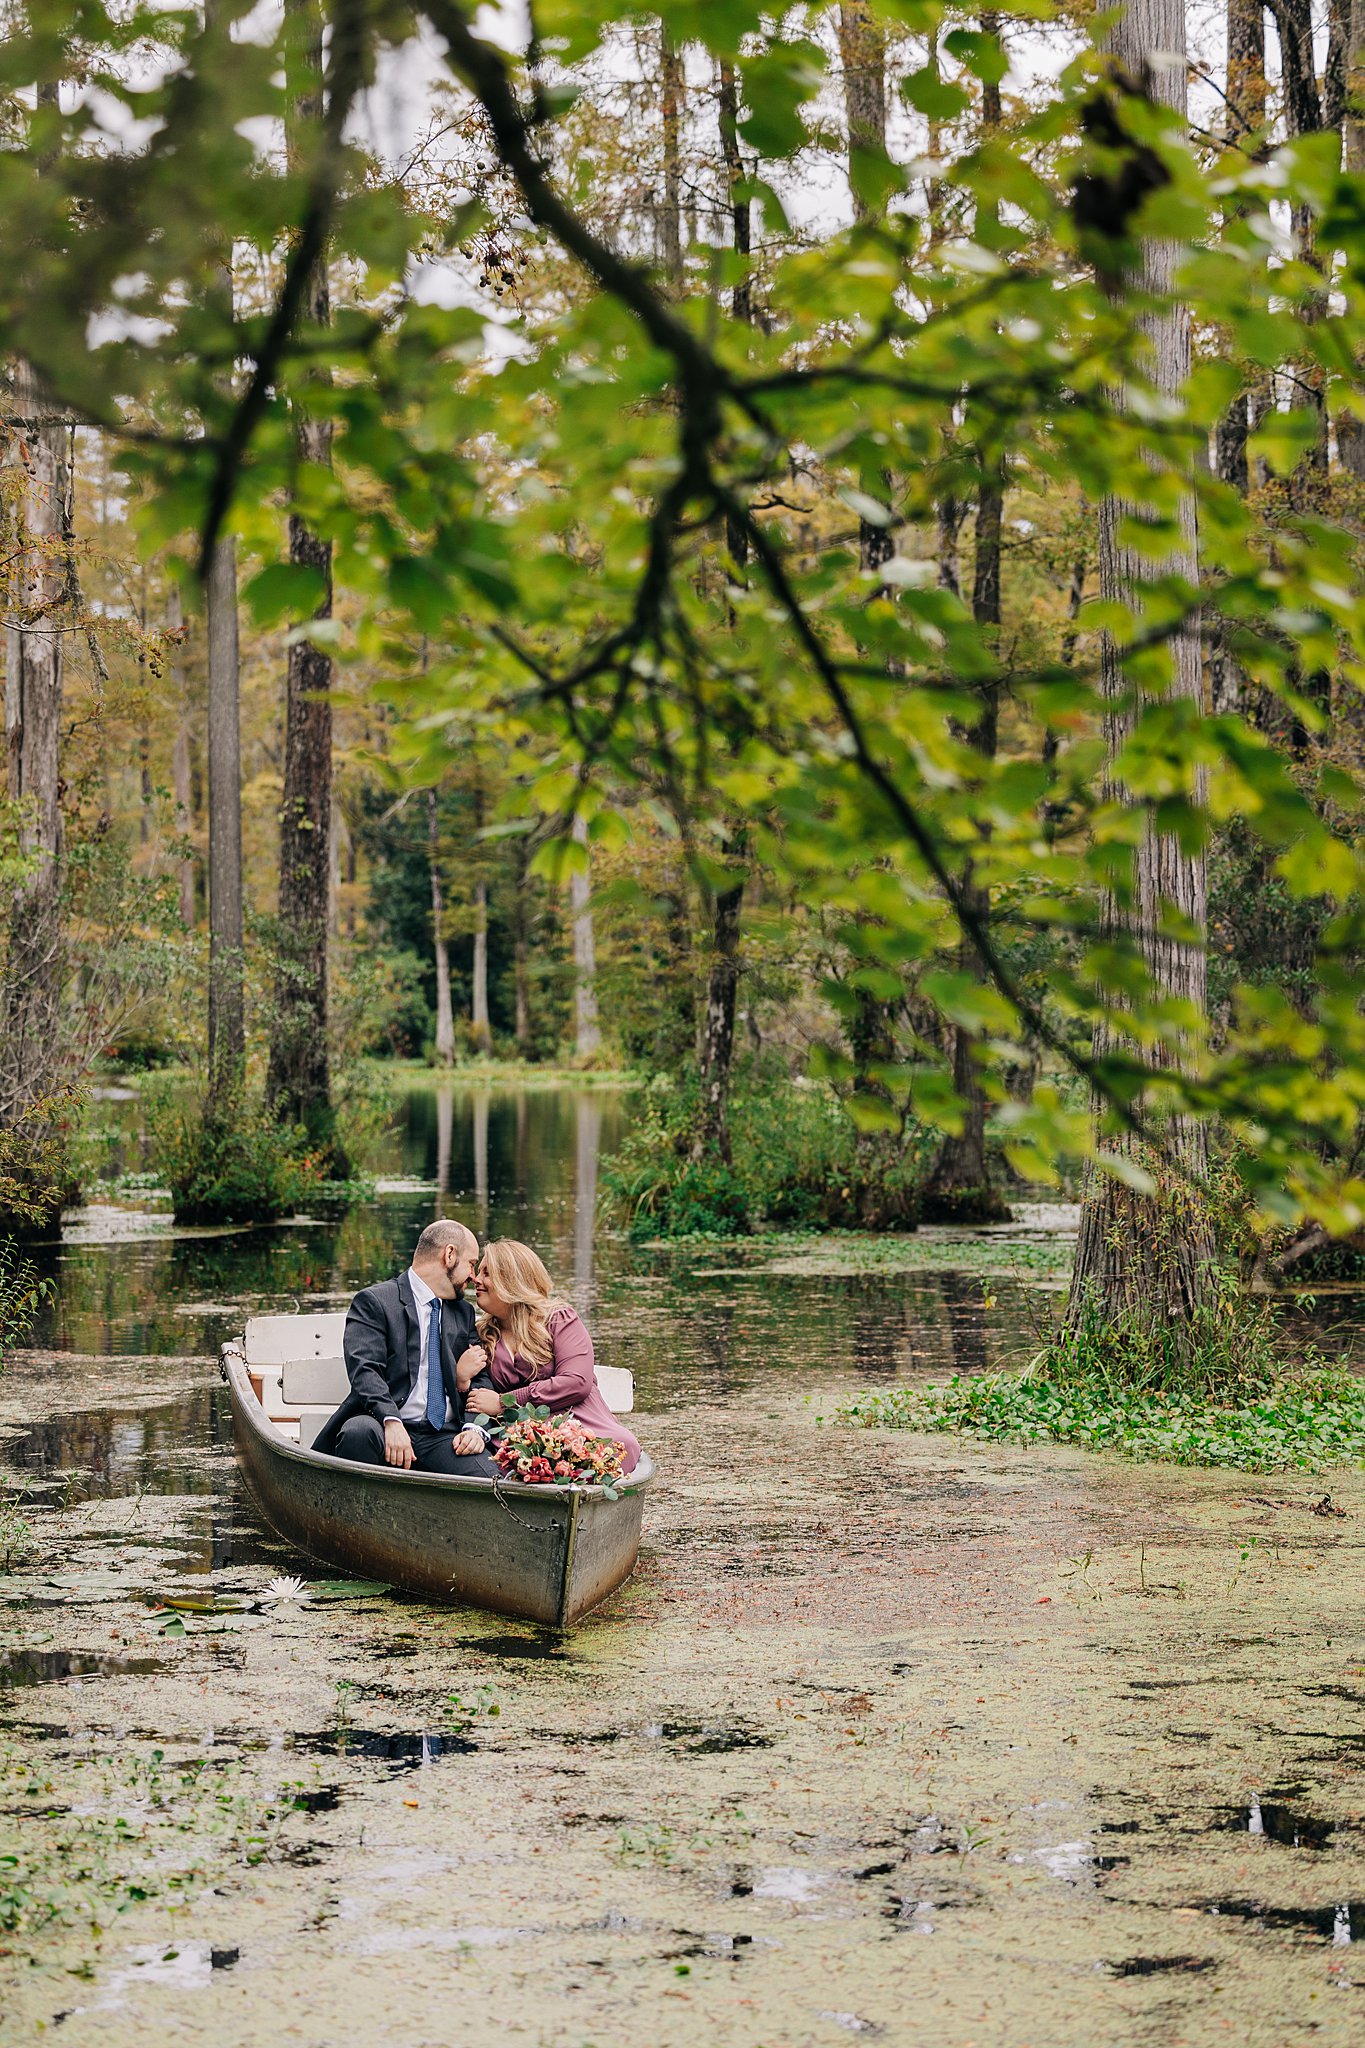 A young couple snuggle and lean in for a kiss while floating through a swamp during their engagement